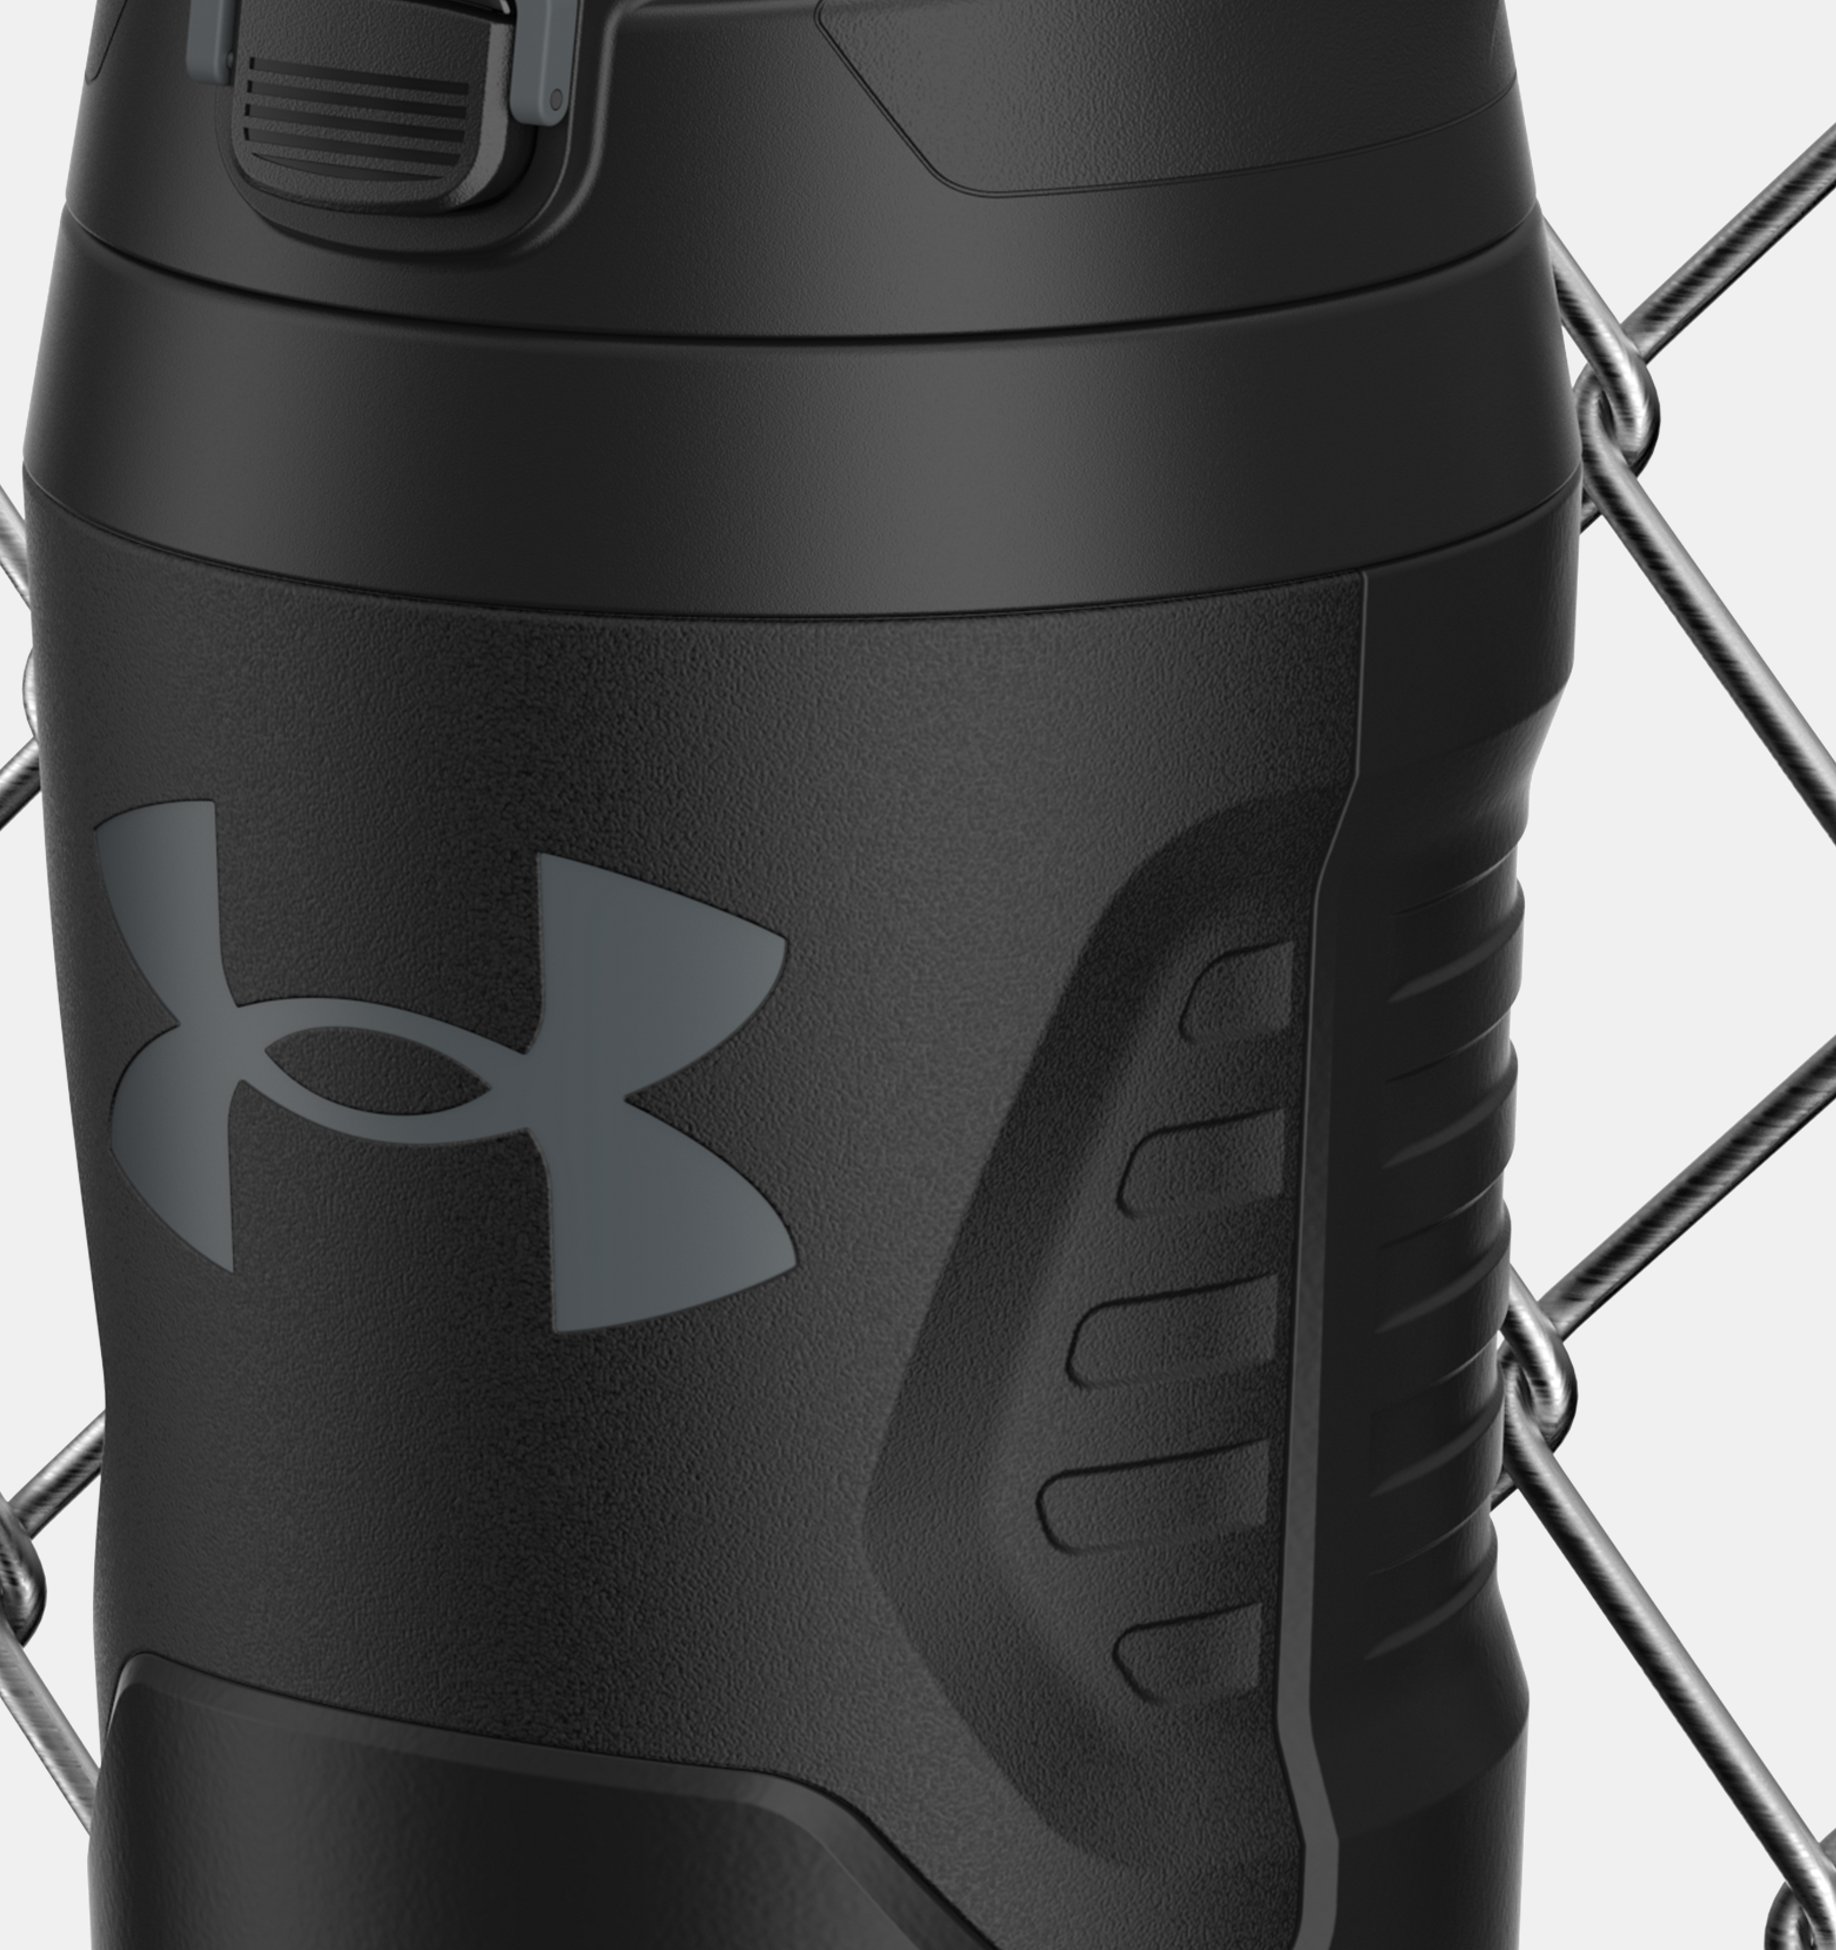 Playmaker 32 oz. Water Bottle | Under Armour